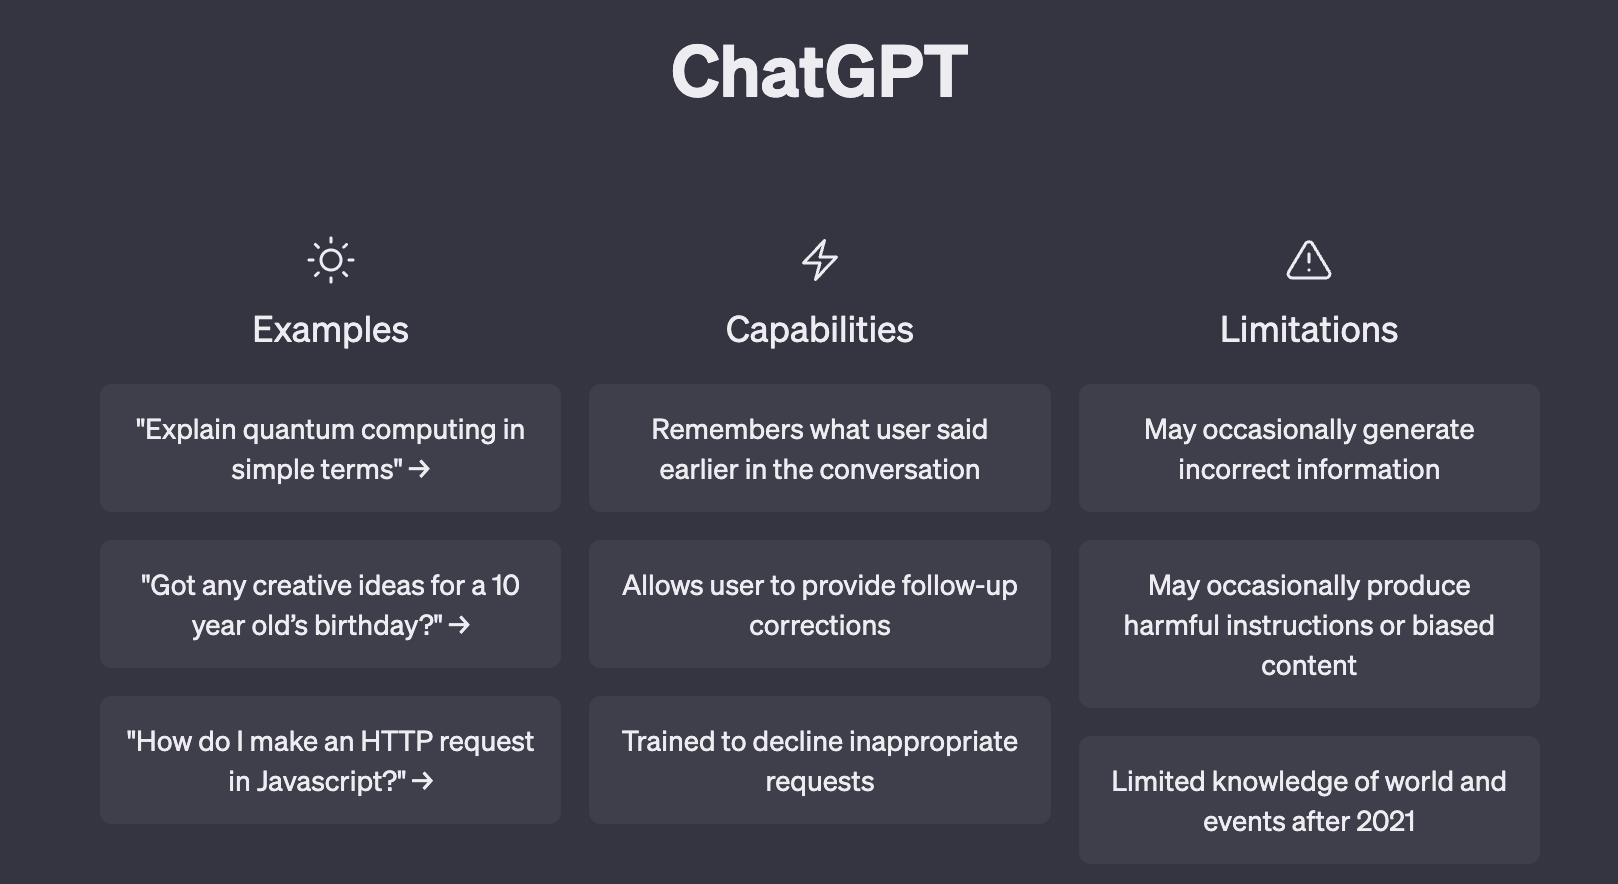 How to Use ChatGPT for Software Development